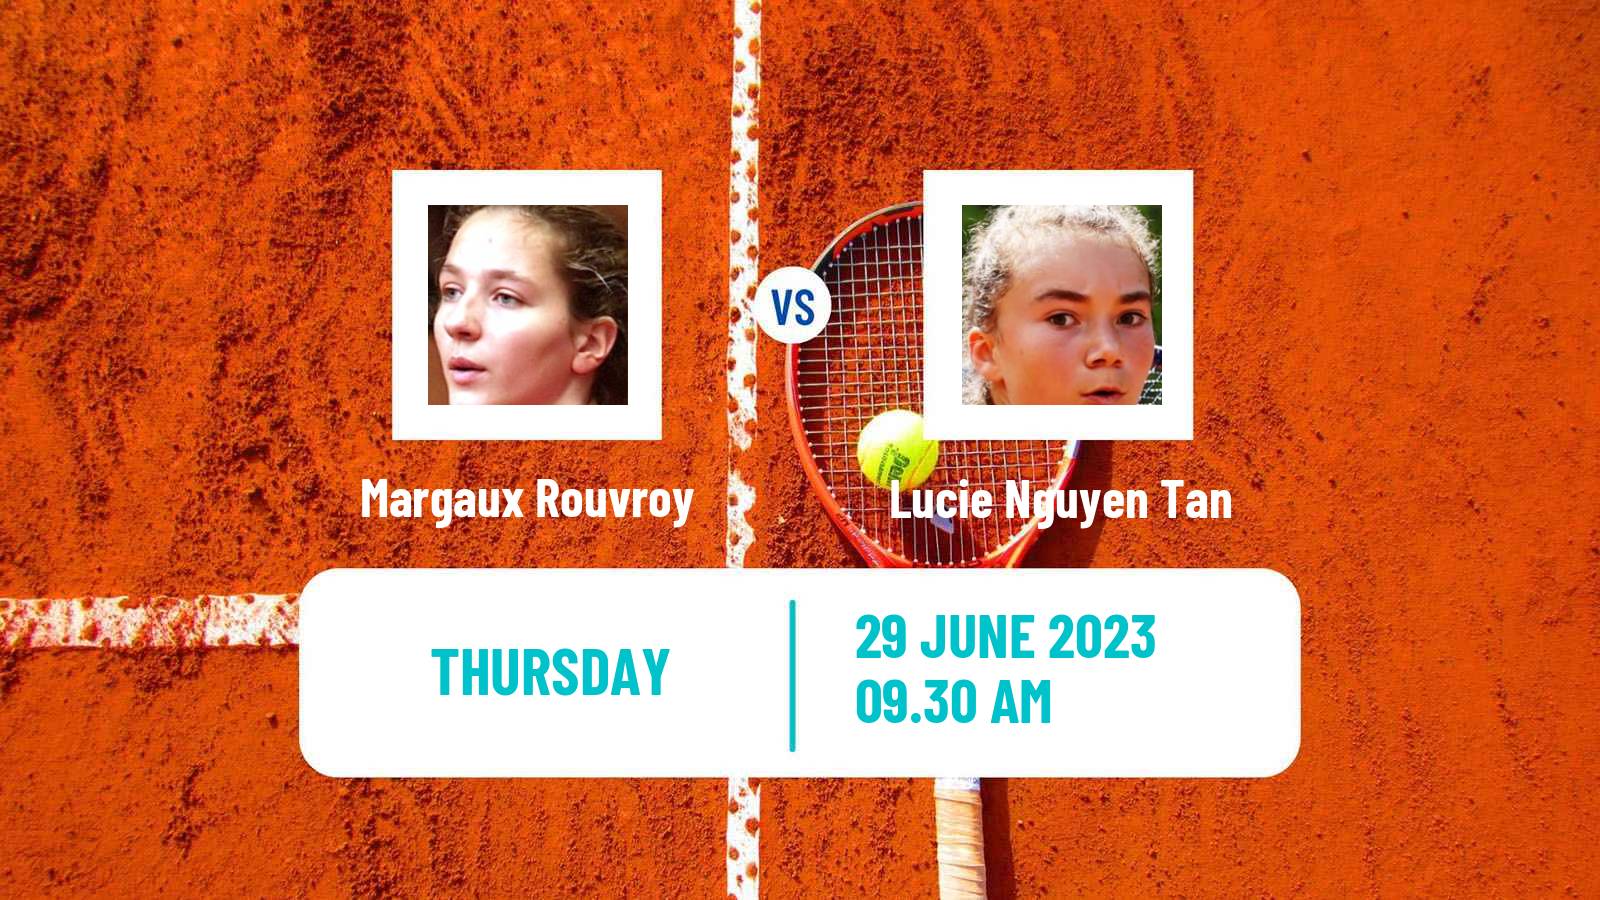 Tennis ITF W25 Perigueux Women Margaux Rouvroy - Lucie Nguyen Tan